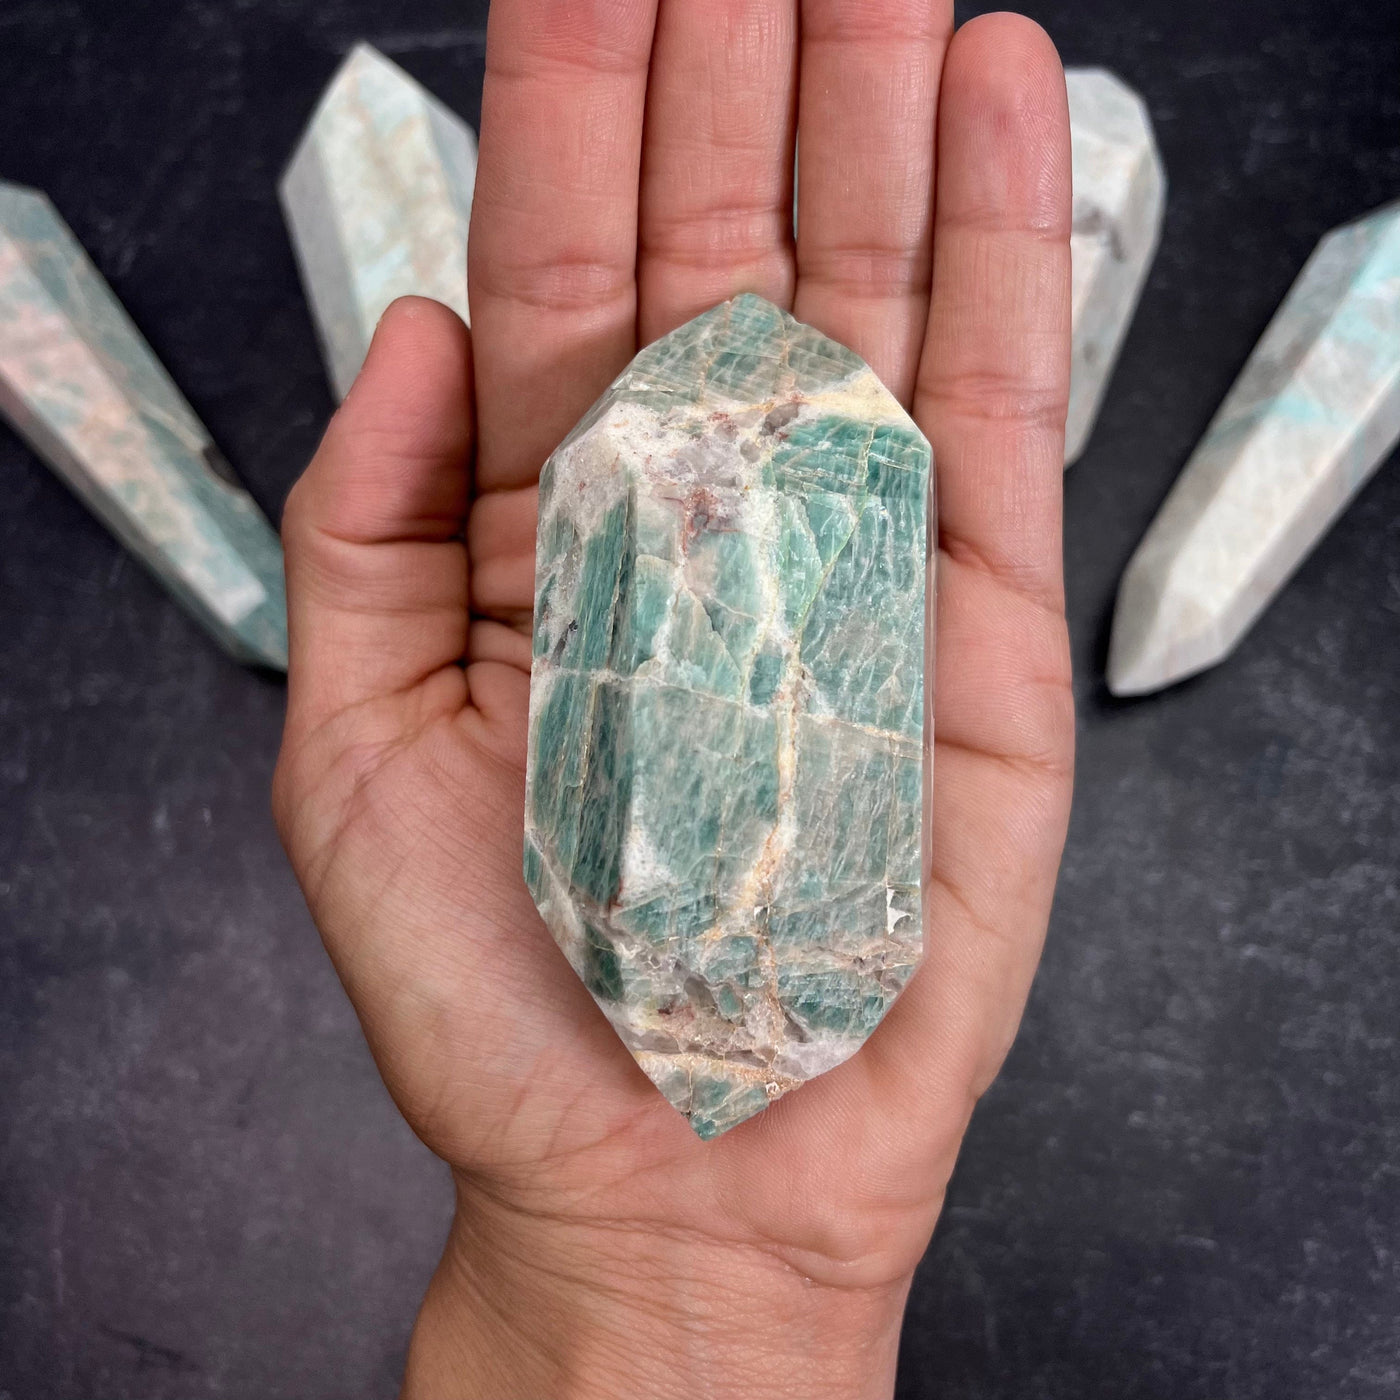 Amazonite Polished Double Terminated Point, in the weight range of 150g-200g, laying in palm of woman's hand.